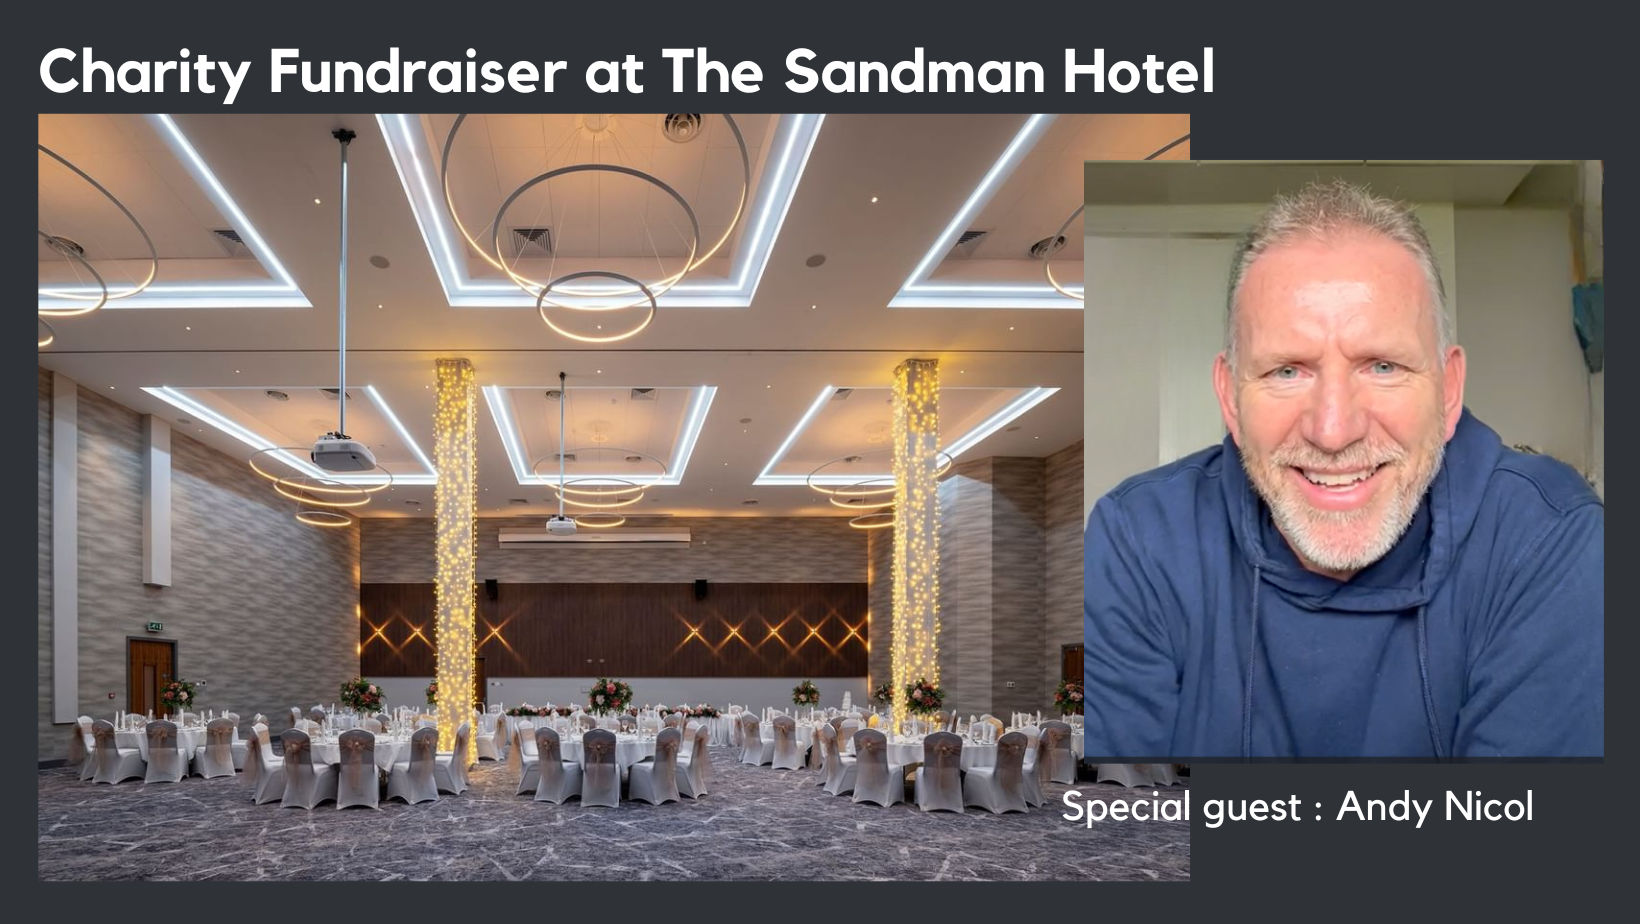 image of a beautifully laid out dining room at a hotel, and photo of Andy Nicol